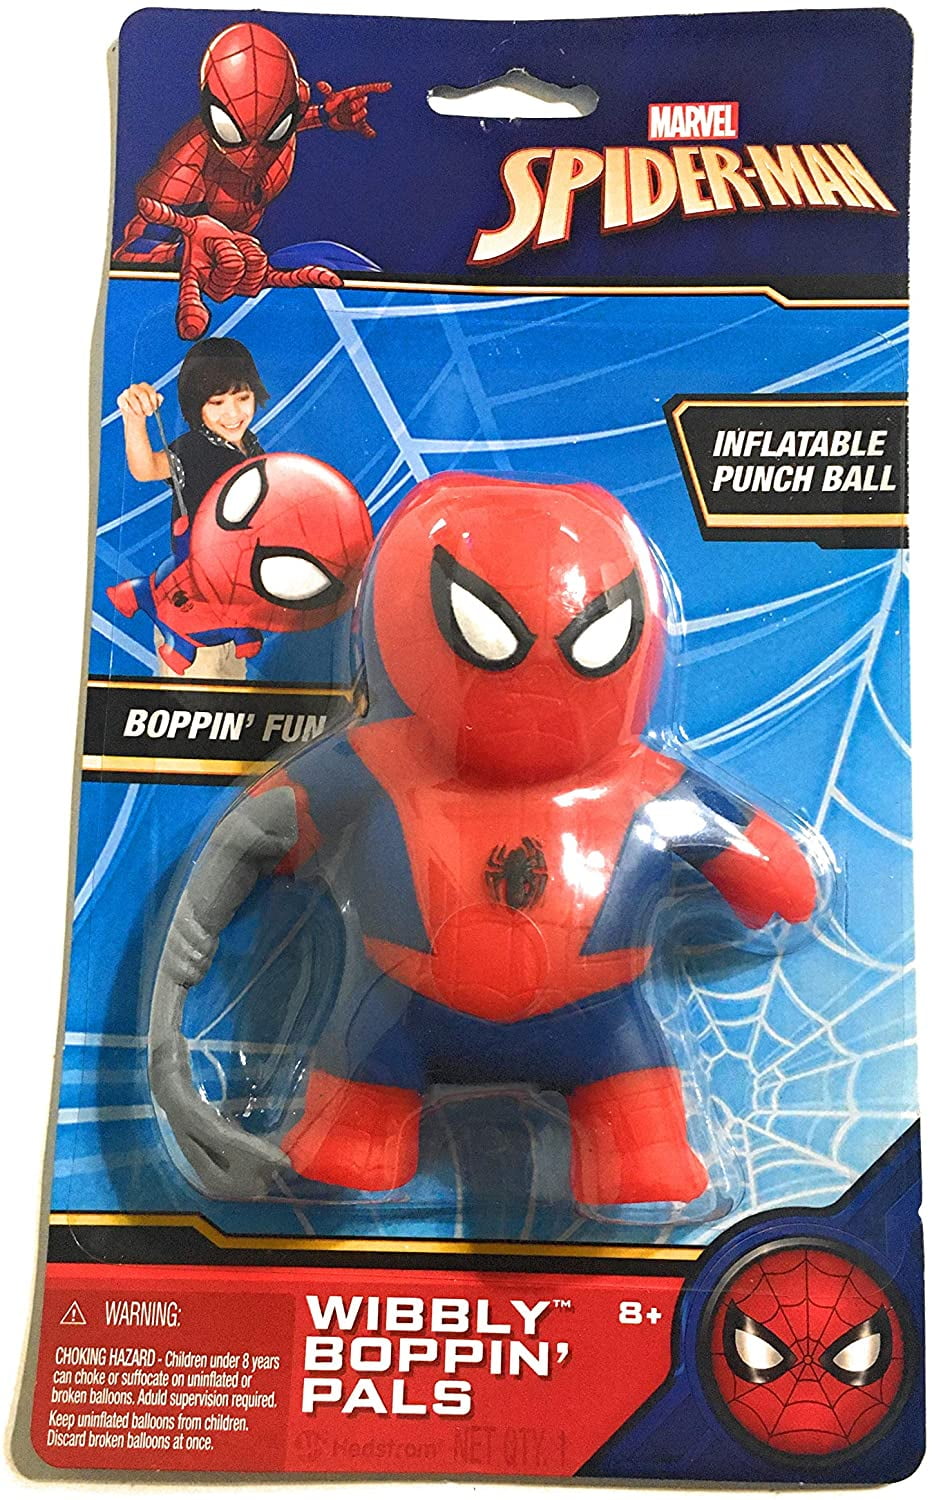 Marvel Spiderman Mini Inflatable Boxing Bop Punch Bag Spiderman/Iron Spider Toy 